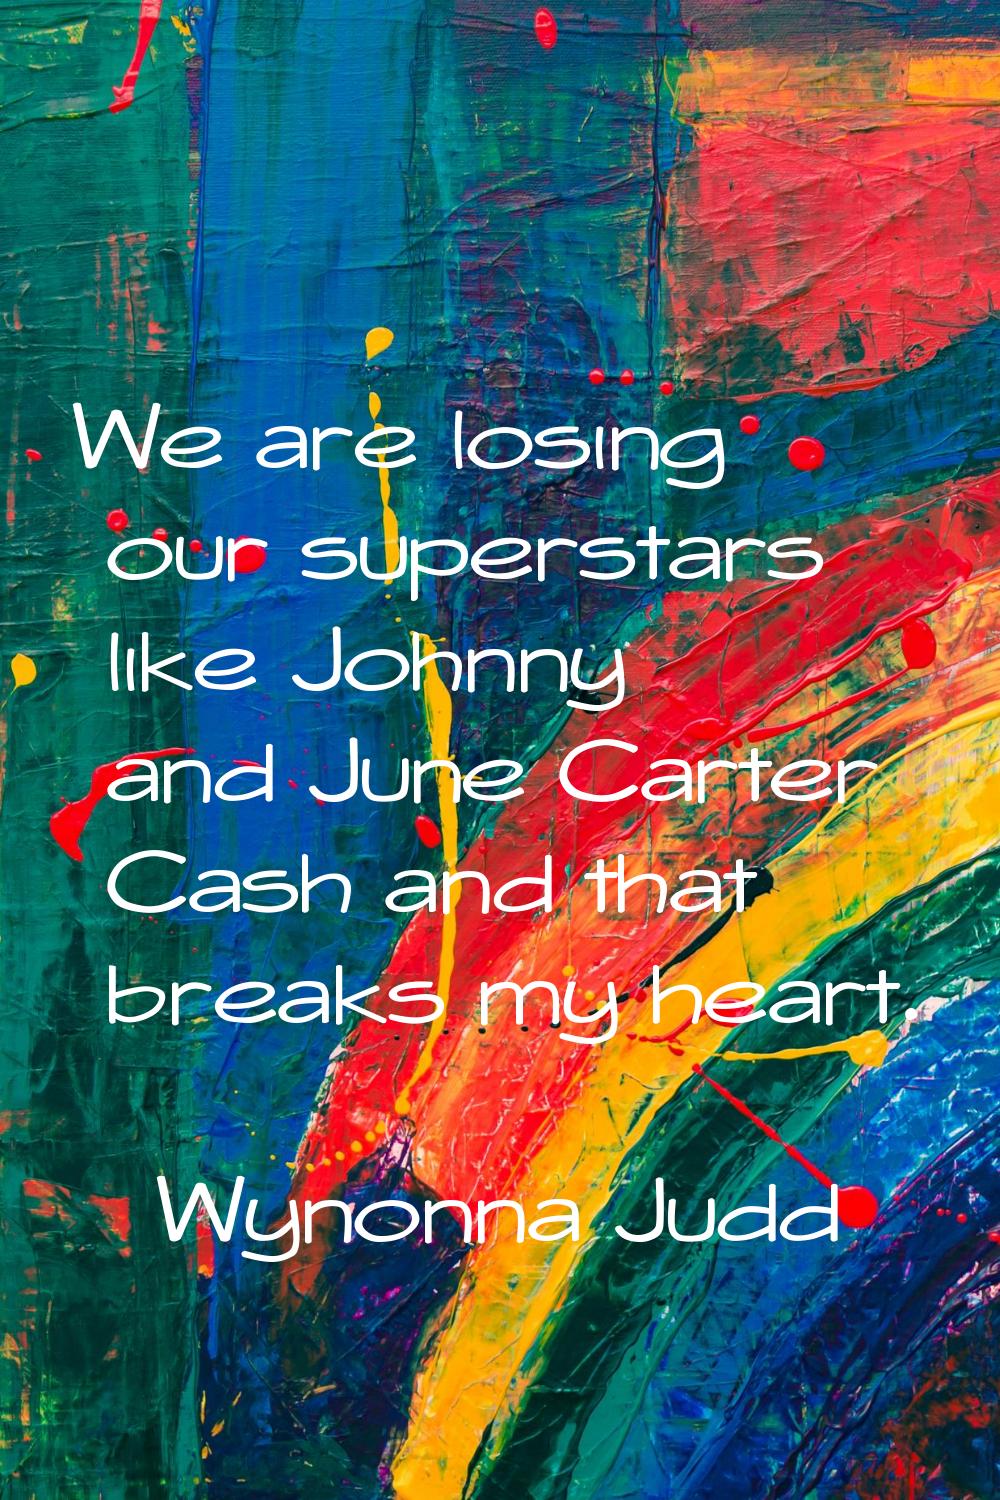 We are losing our superstars like Johnny and June Carter Cash and that breaks my heart.